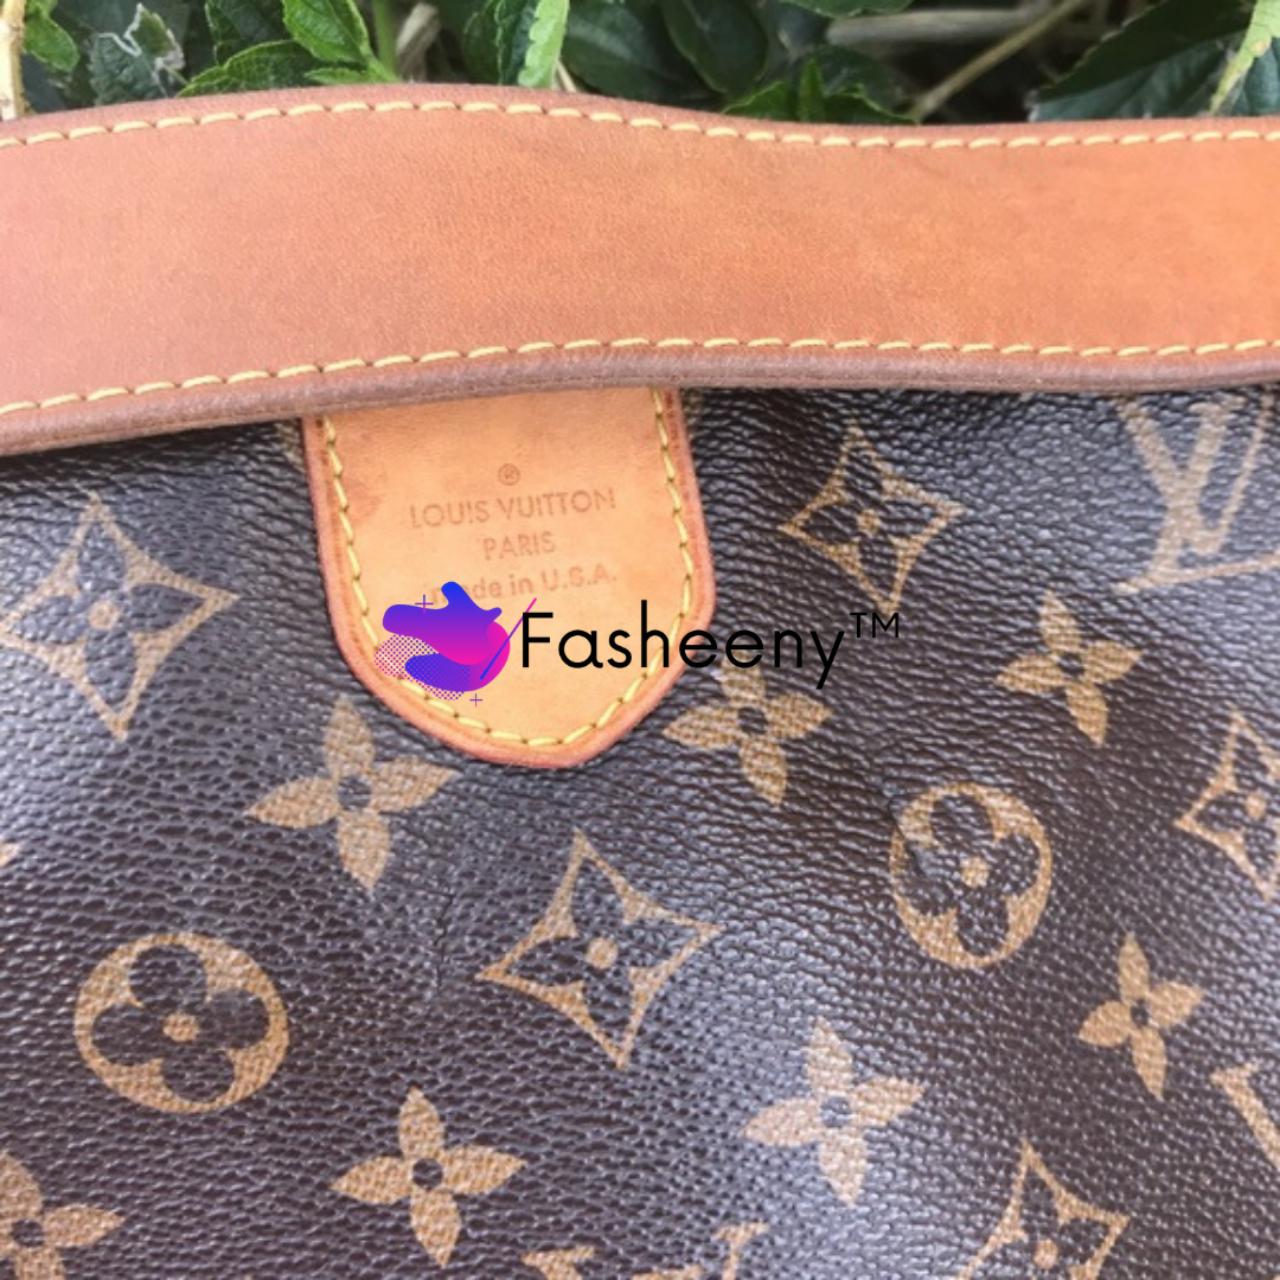 LV Delightful GM Condition 9/10 Leather in perfect - Depop